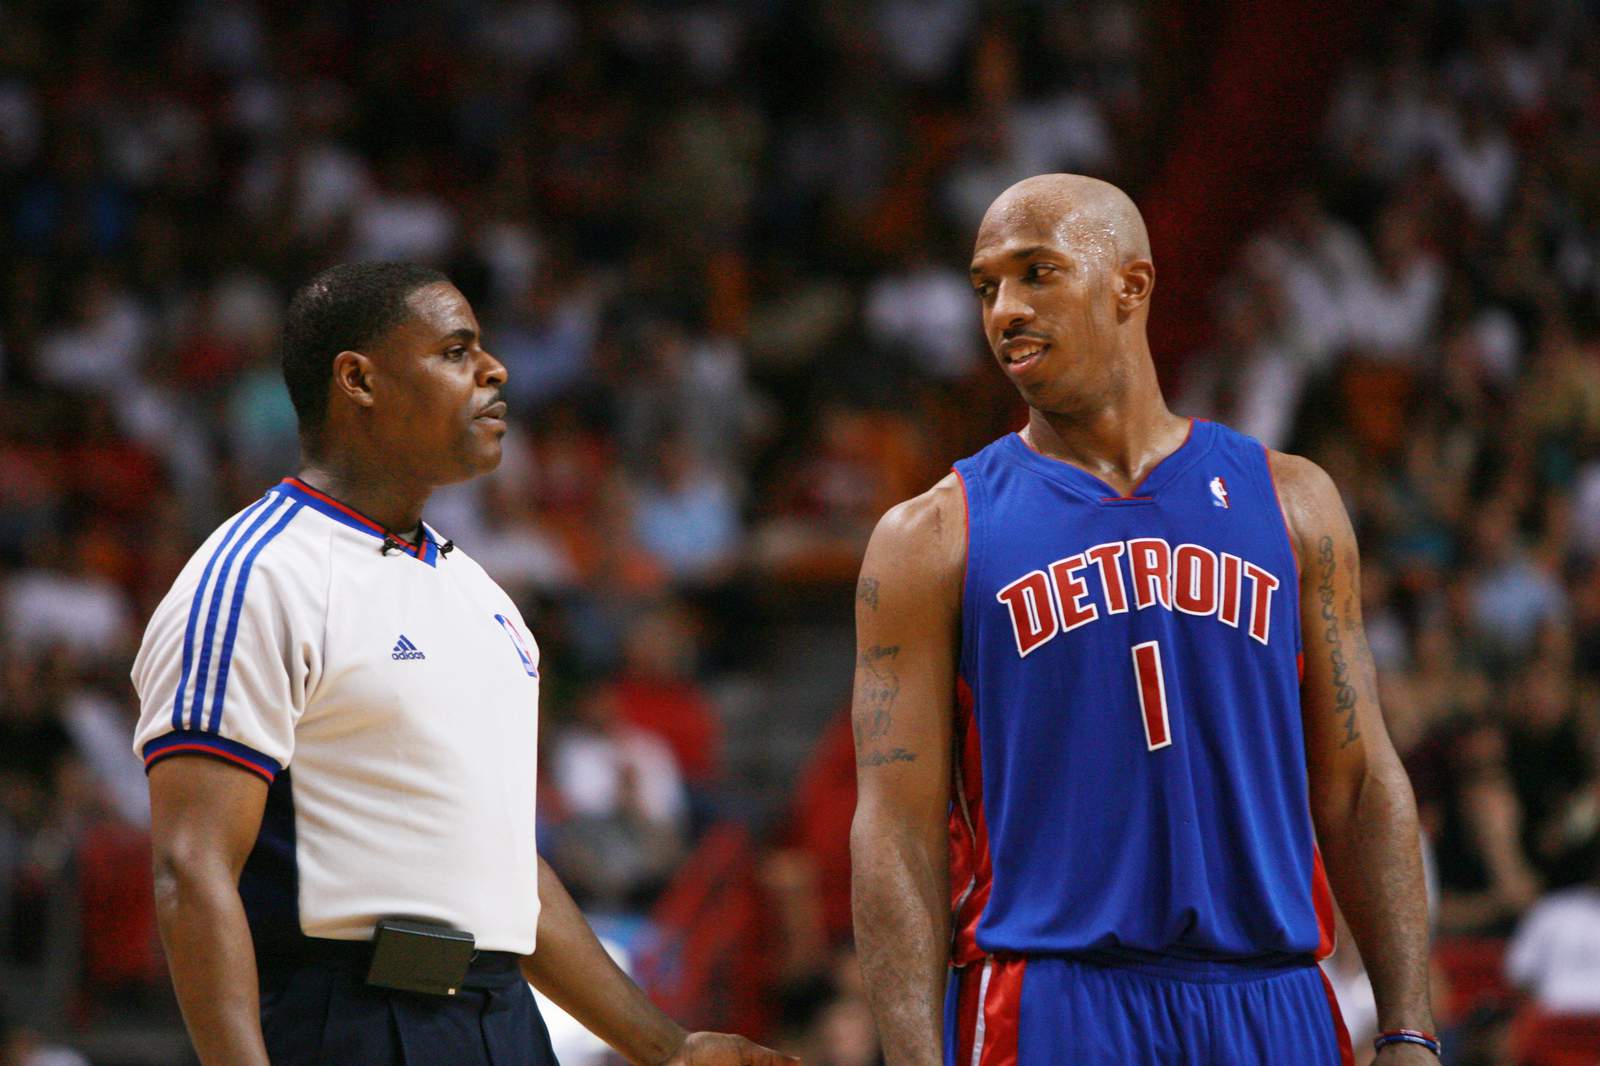 Could Chauncey Billups be next Detroit athlete to return? Pistons reportedly search for GM